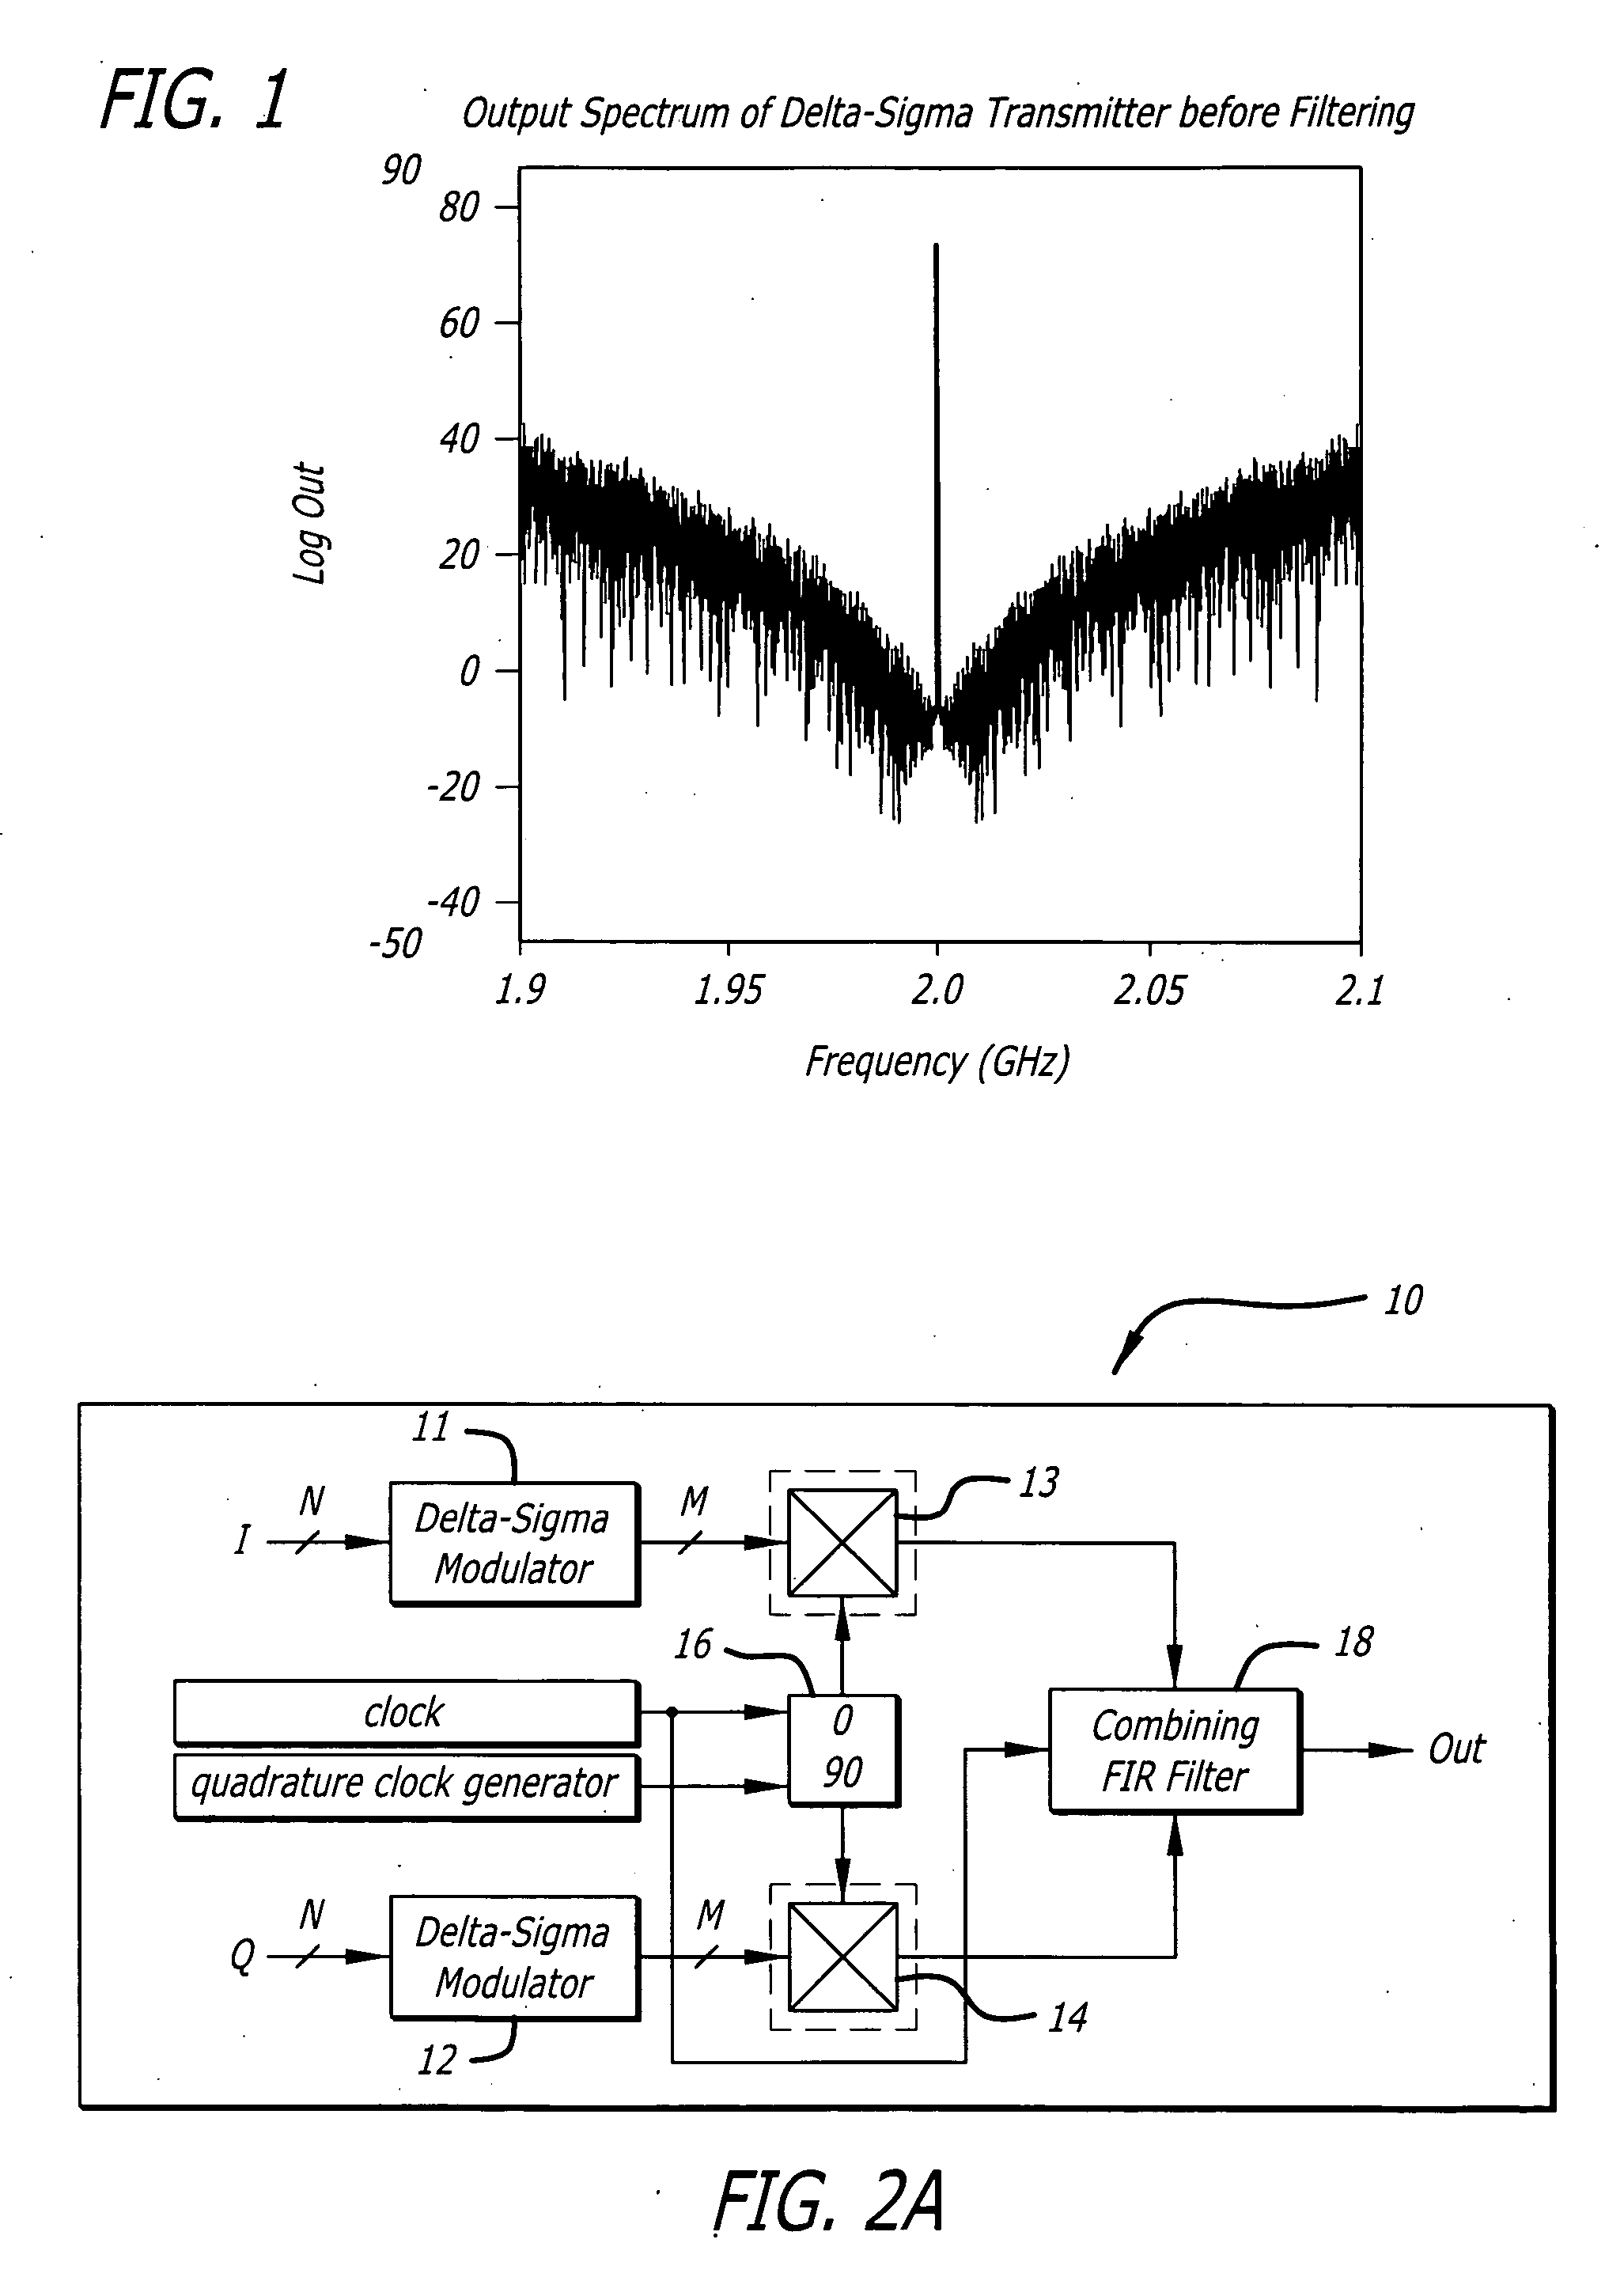 Self-tuning output digital filter for direct conversion delta-sigma transmitter